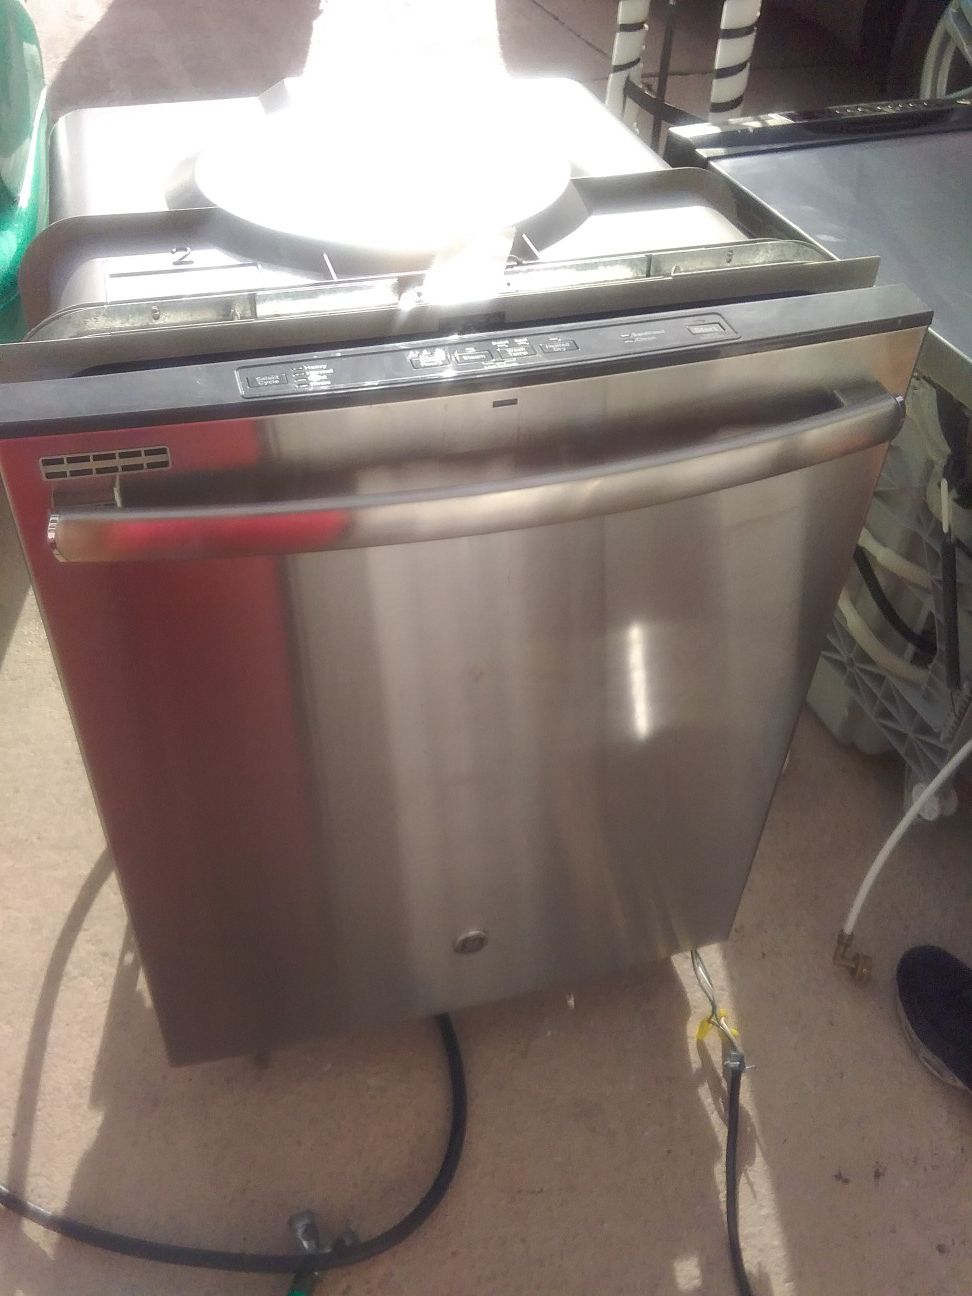 Stainless steel ge dishwasher with plastic tub in good working condition